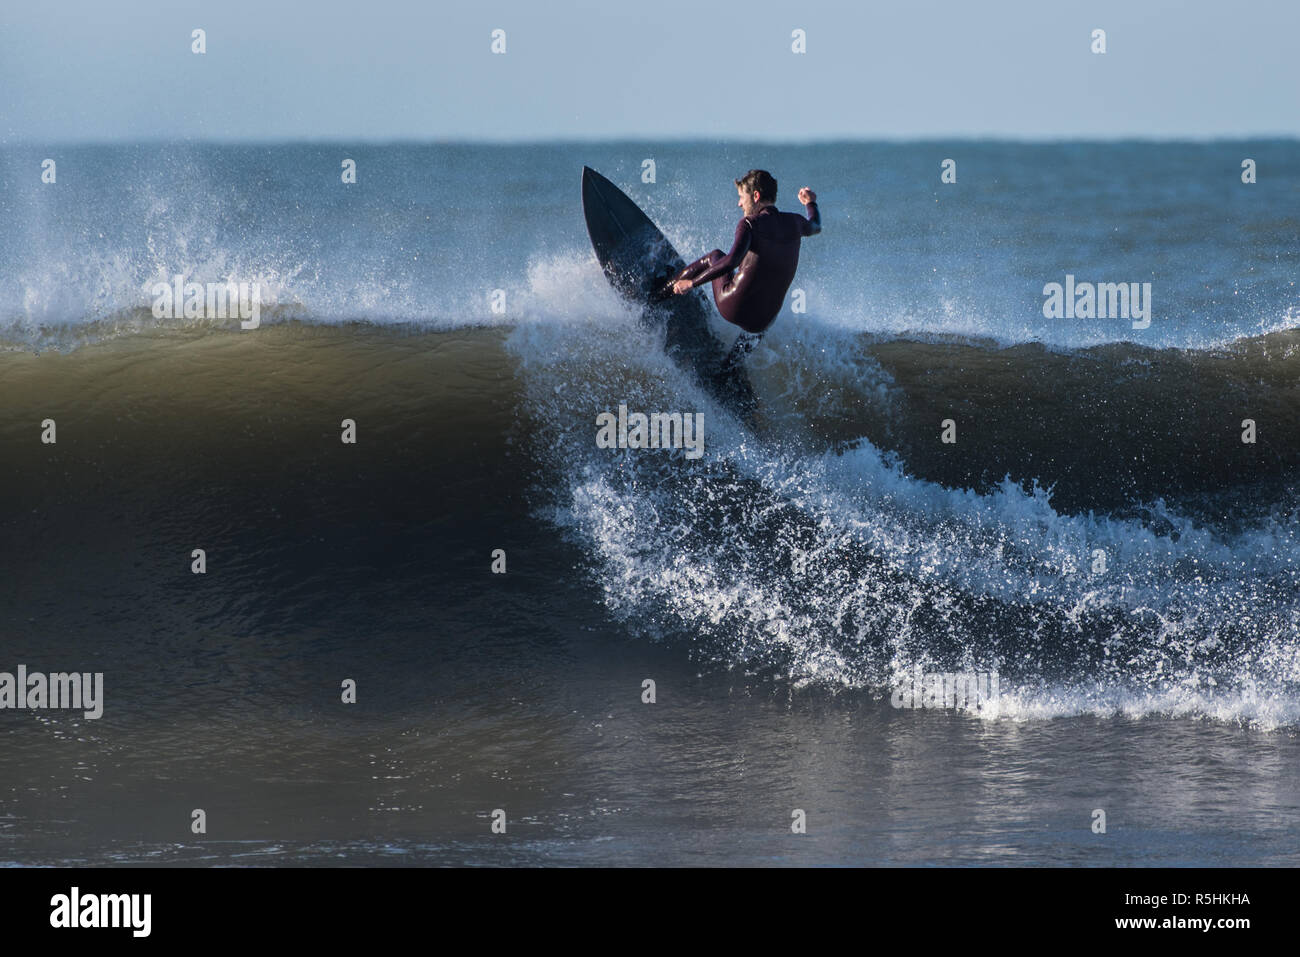 Bearded surfer in black wetsuit flying across wave face and off the lip on a 6 foot set wave in Ventura, California, USA on December 1, 2018. Stock Photo